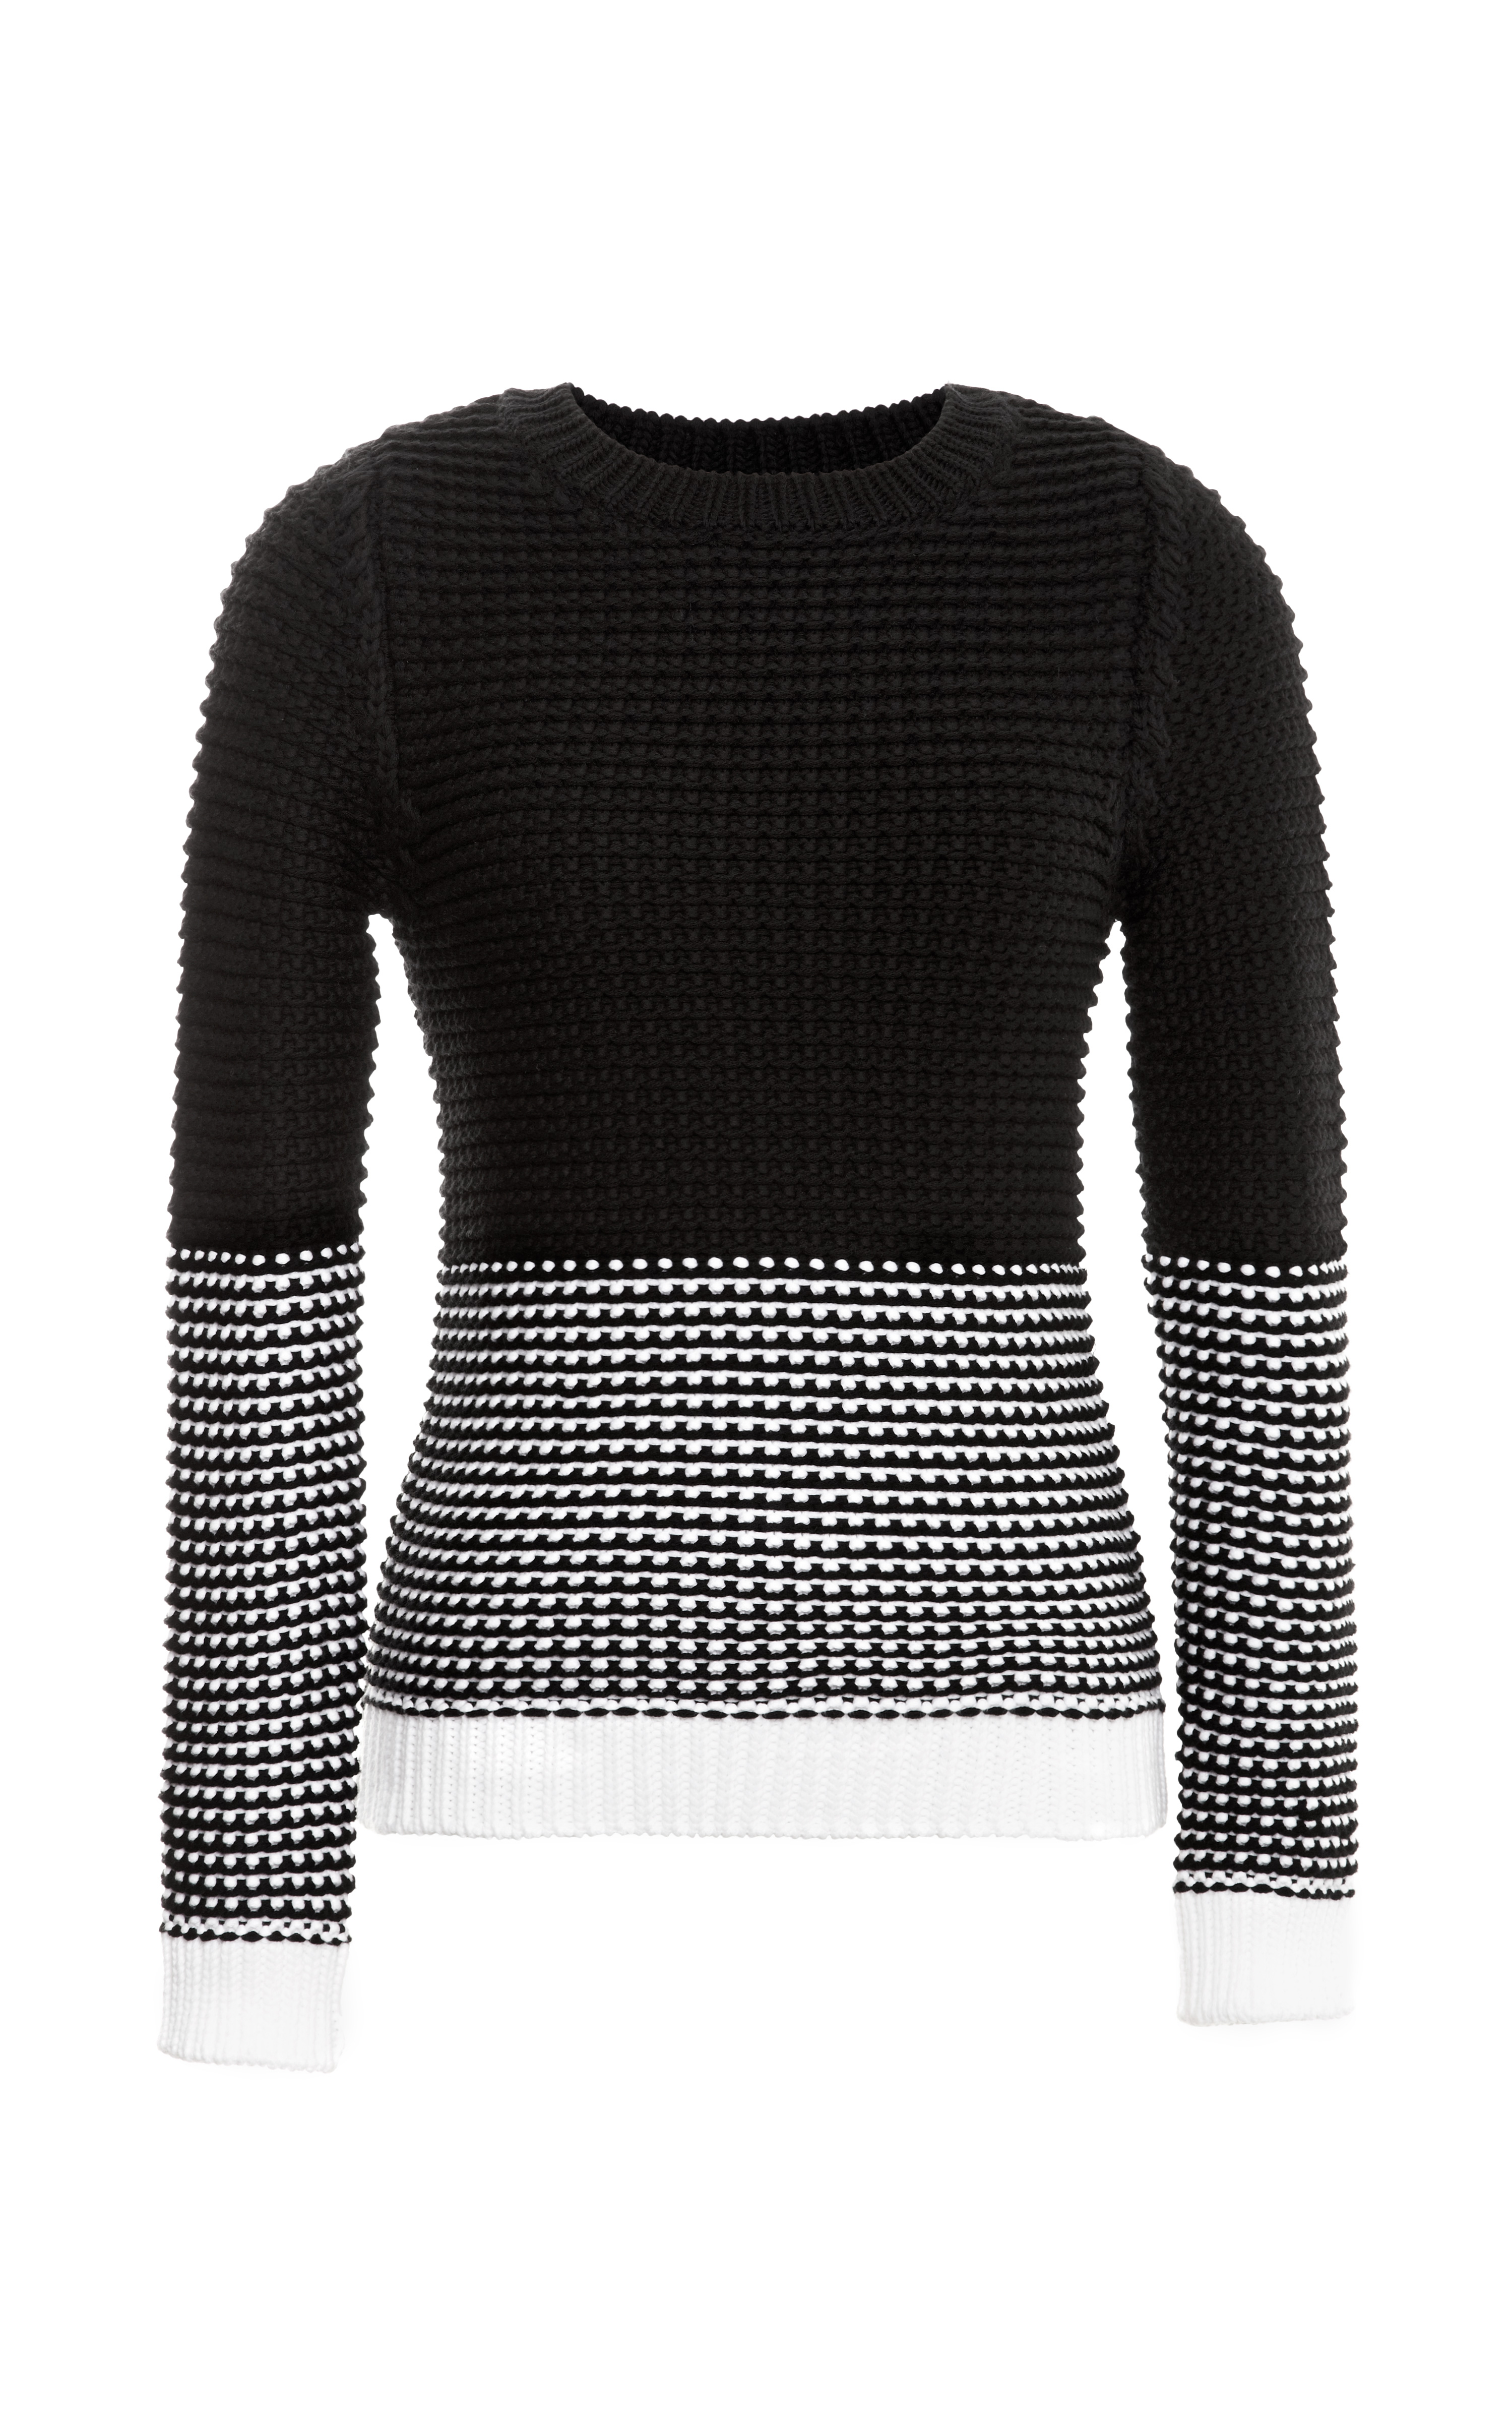 Narciso rodriguez Wool Blend Chunky Knit Crewneck Sweater in White | Lyst